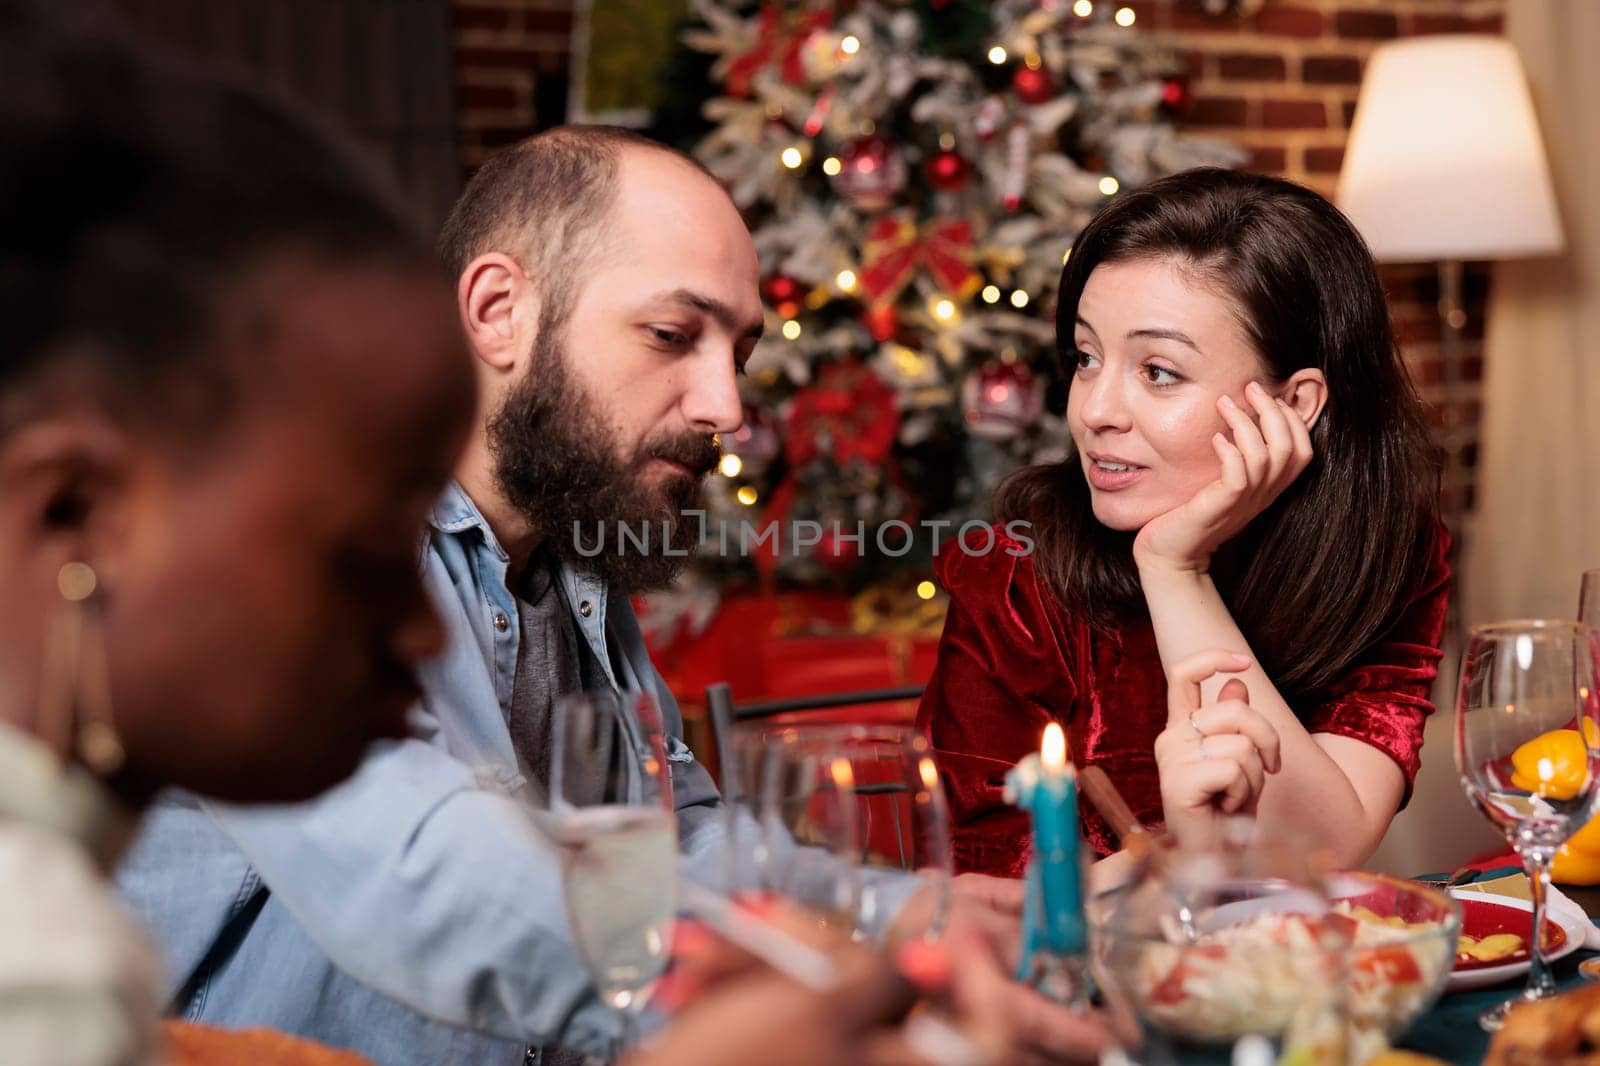 People enjoying christmas eve holiday with family, gathering at dinner table with friends. Diverse persons enjoying winter celebration in december with homemade meal and alcohol for xmas.